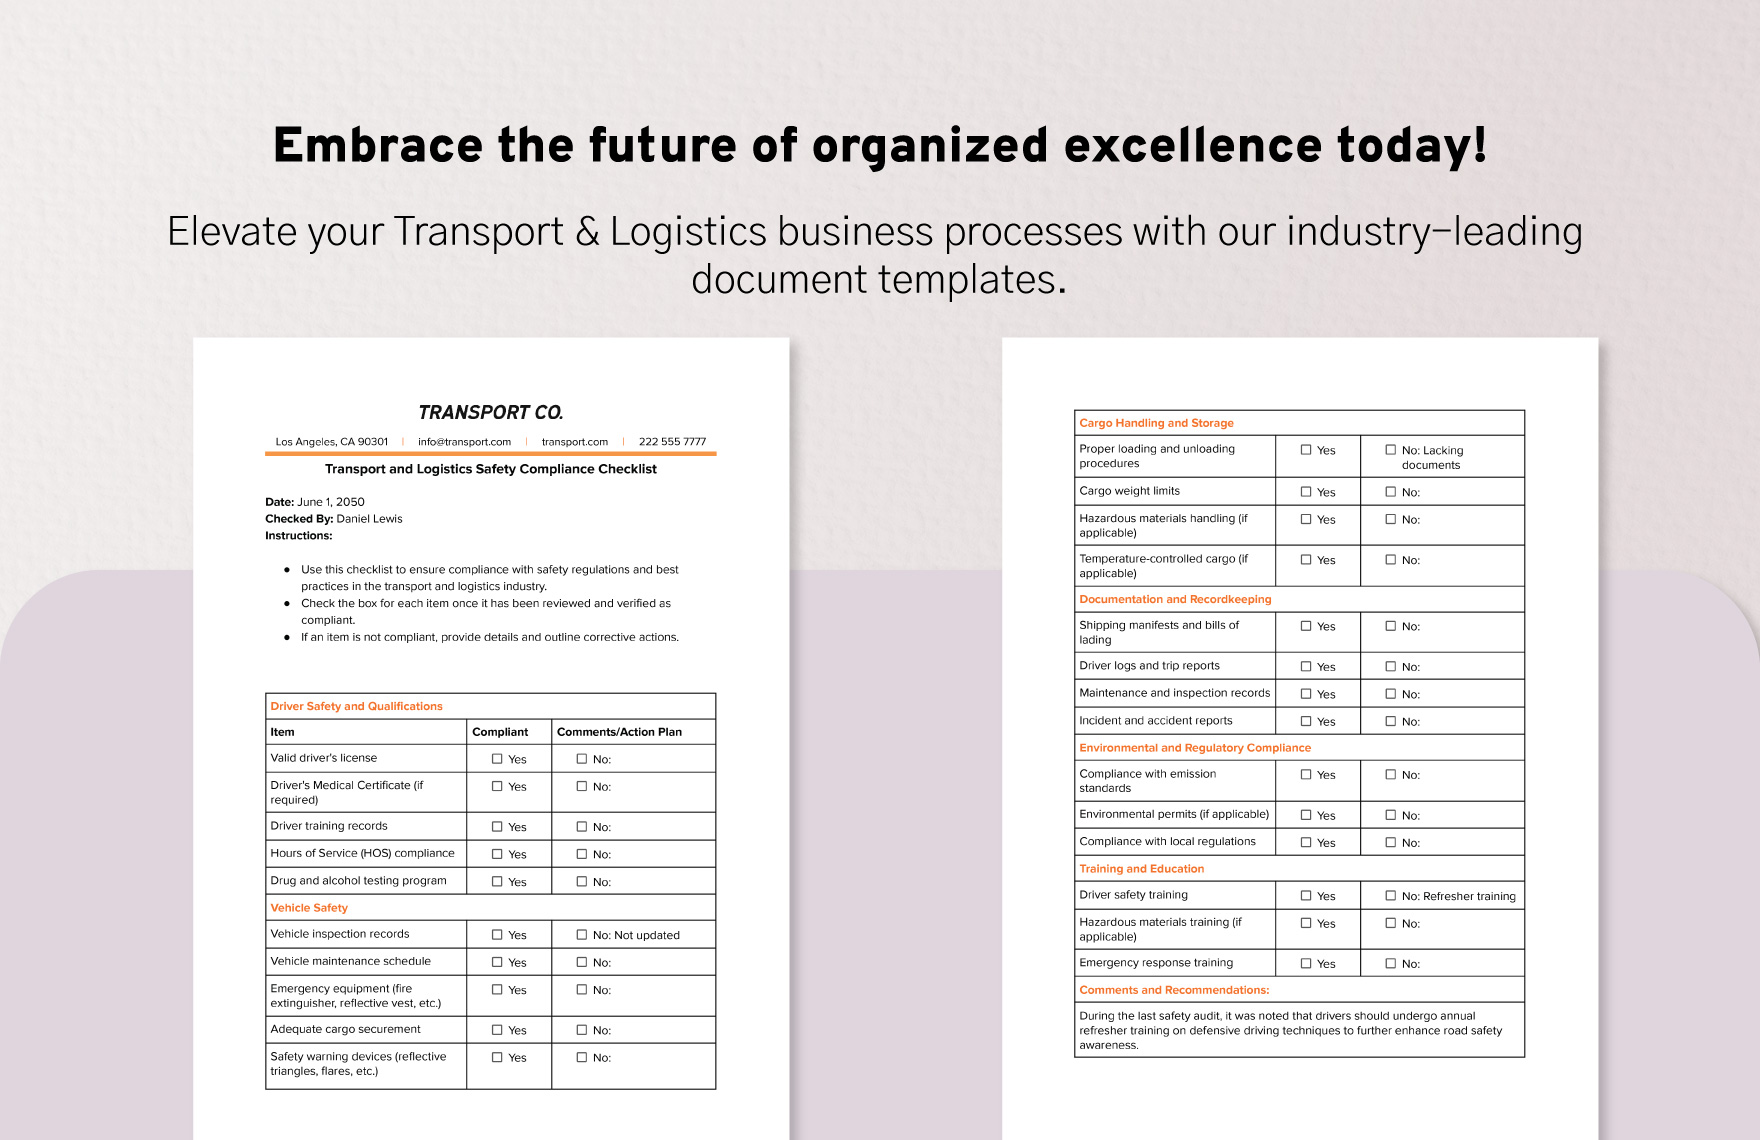 Transport and Logistics Safety Compliance Checklist Template